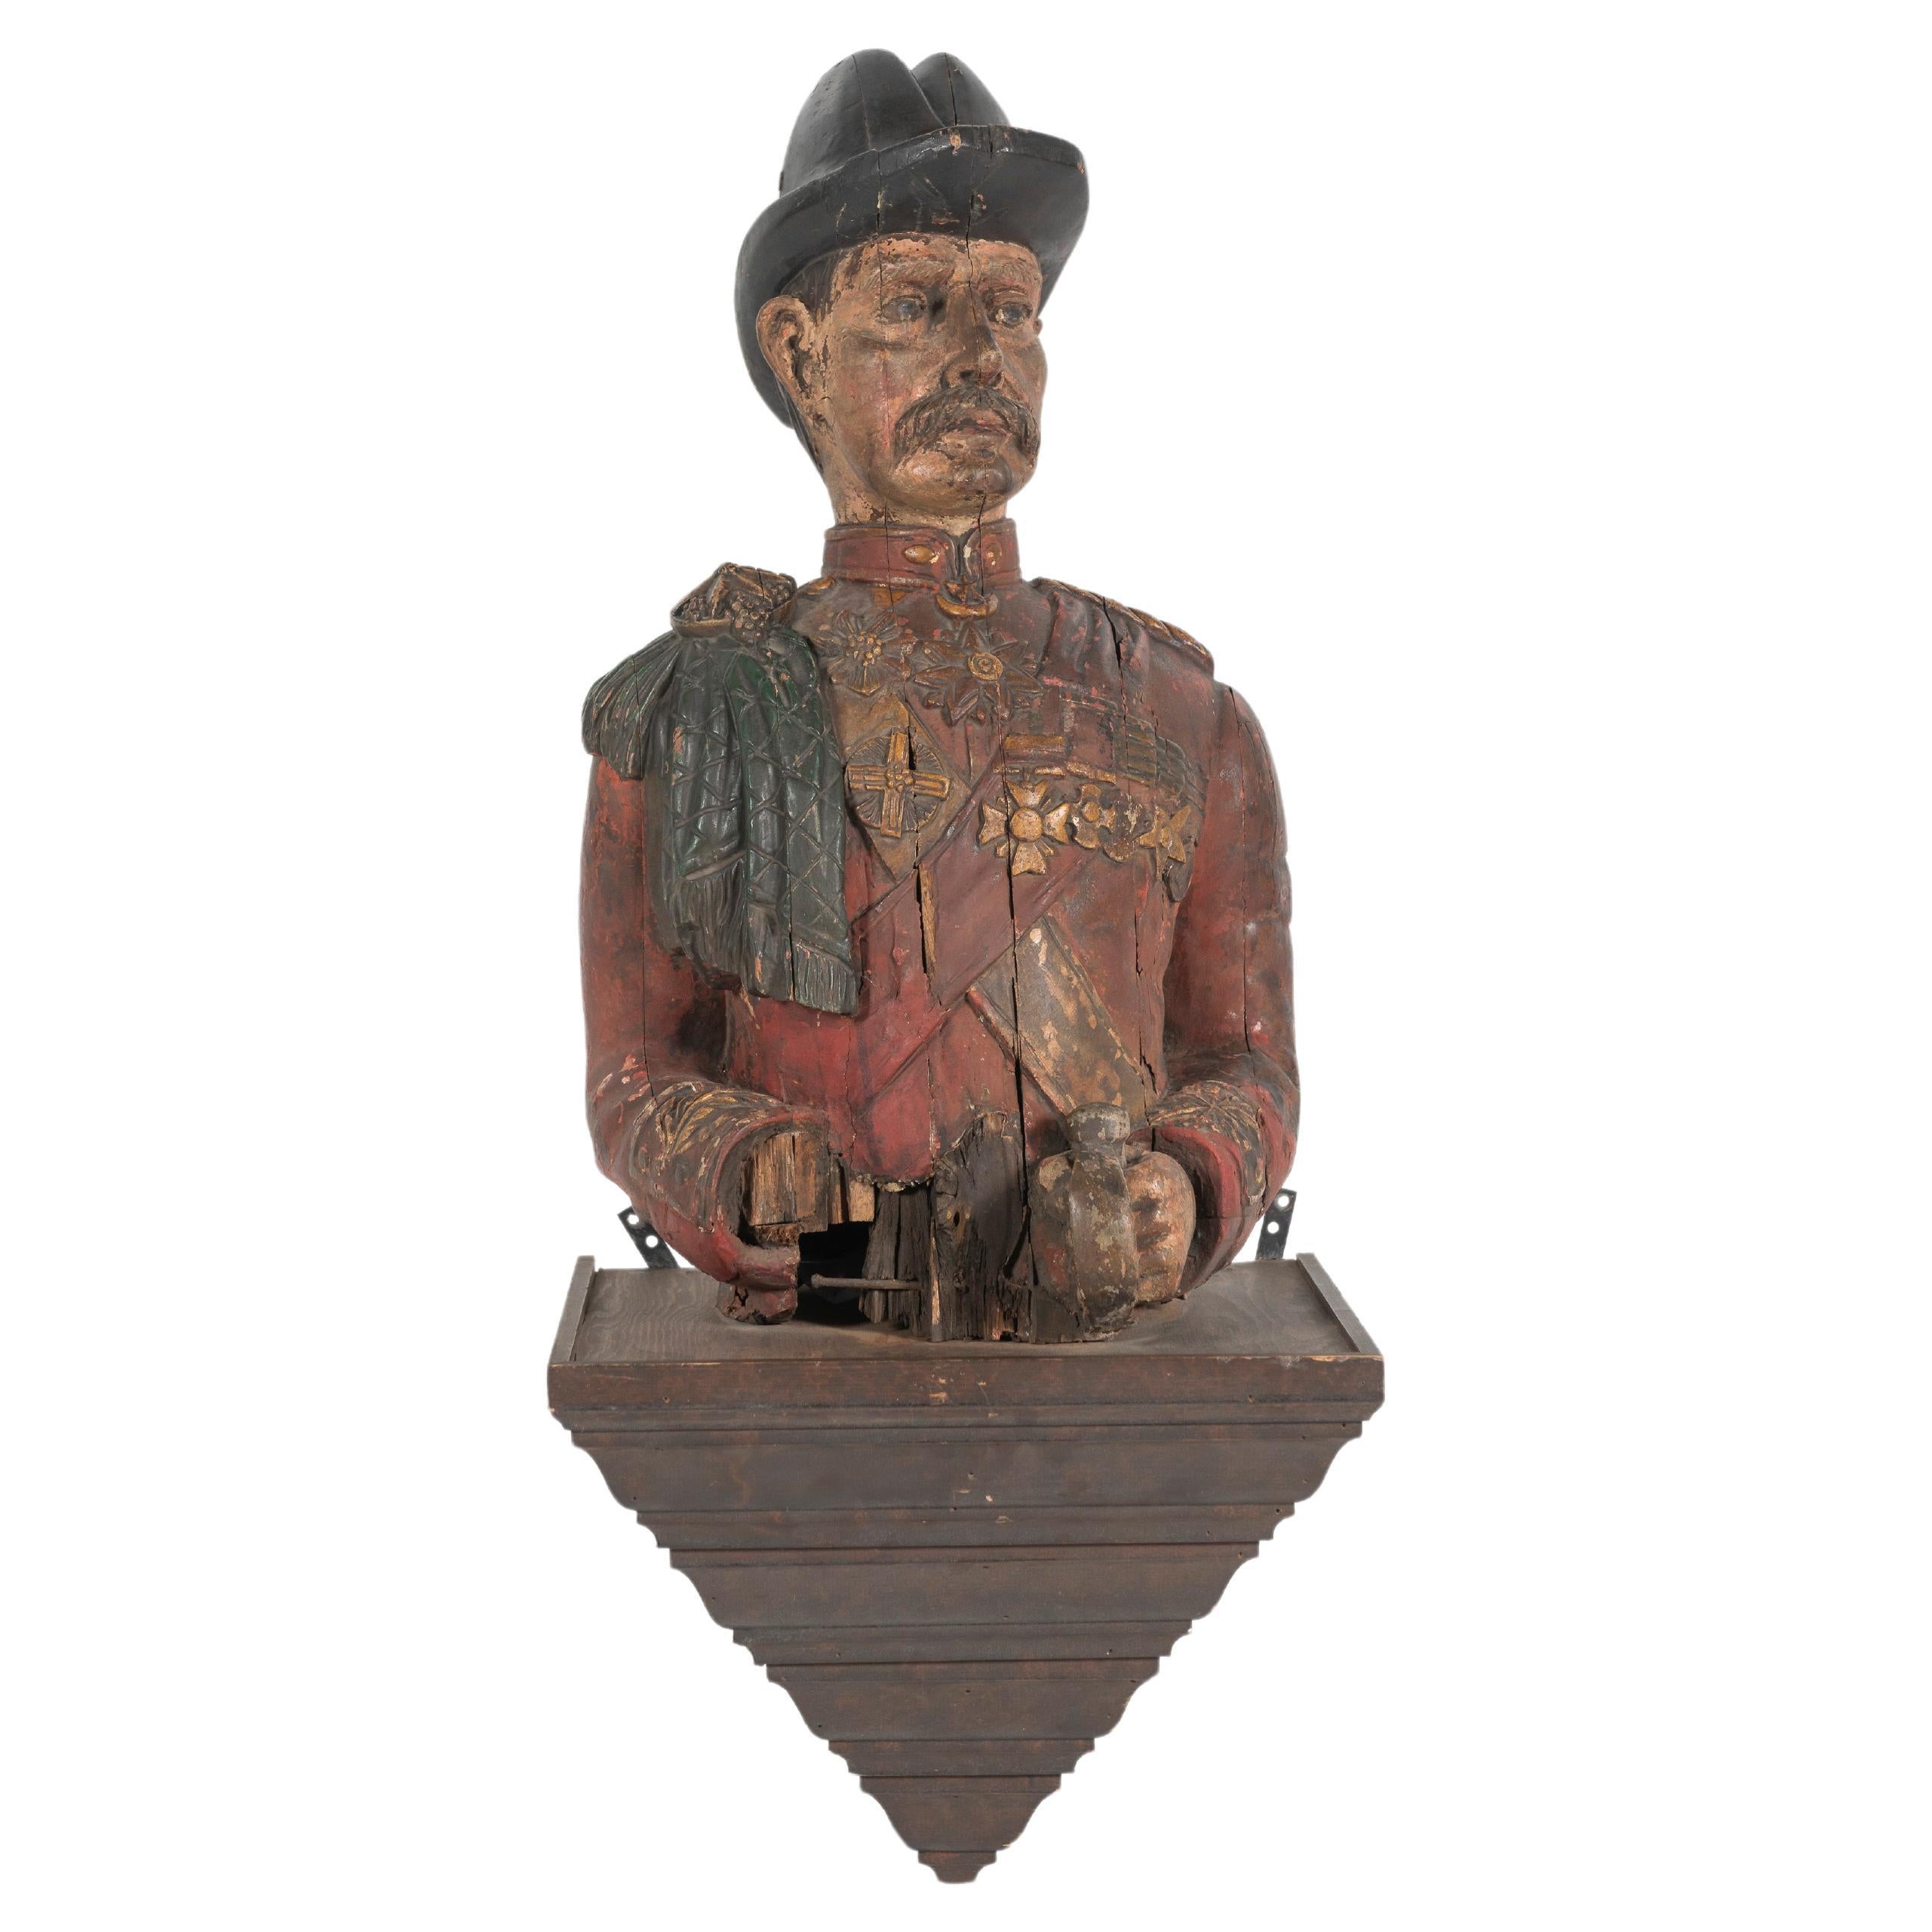 Late 19th Century Carved and Painted Figural Bust, England